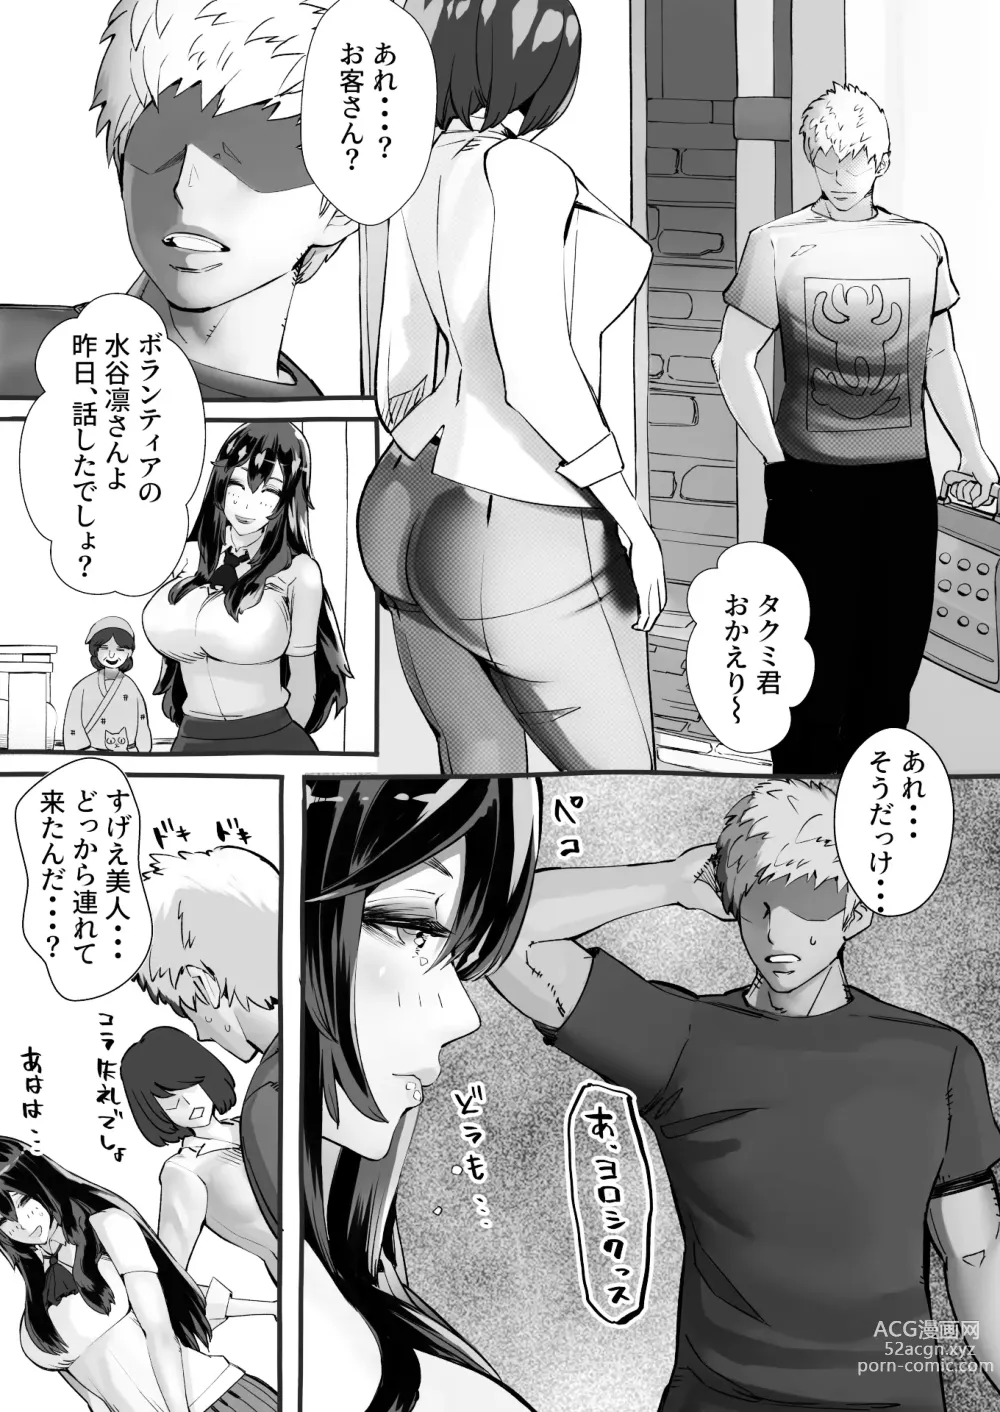 Page 18 of doujinshi 僕の彼女が他人棒で絶頂いたす